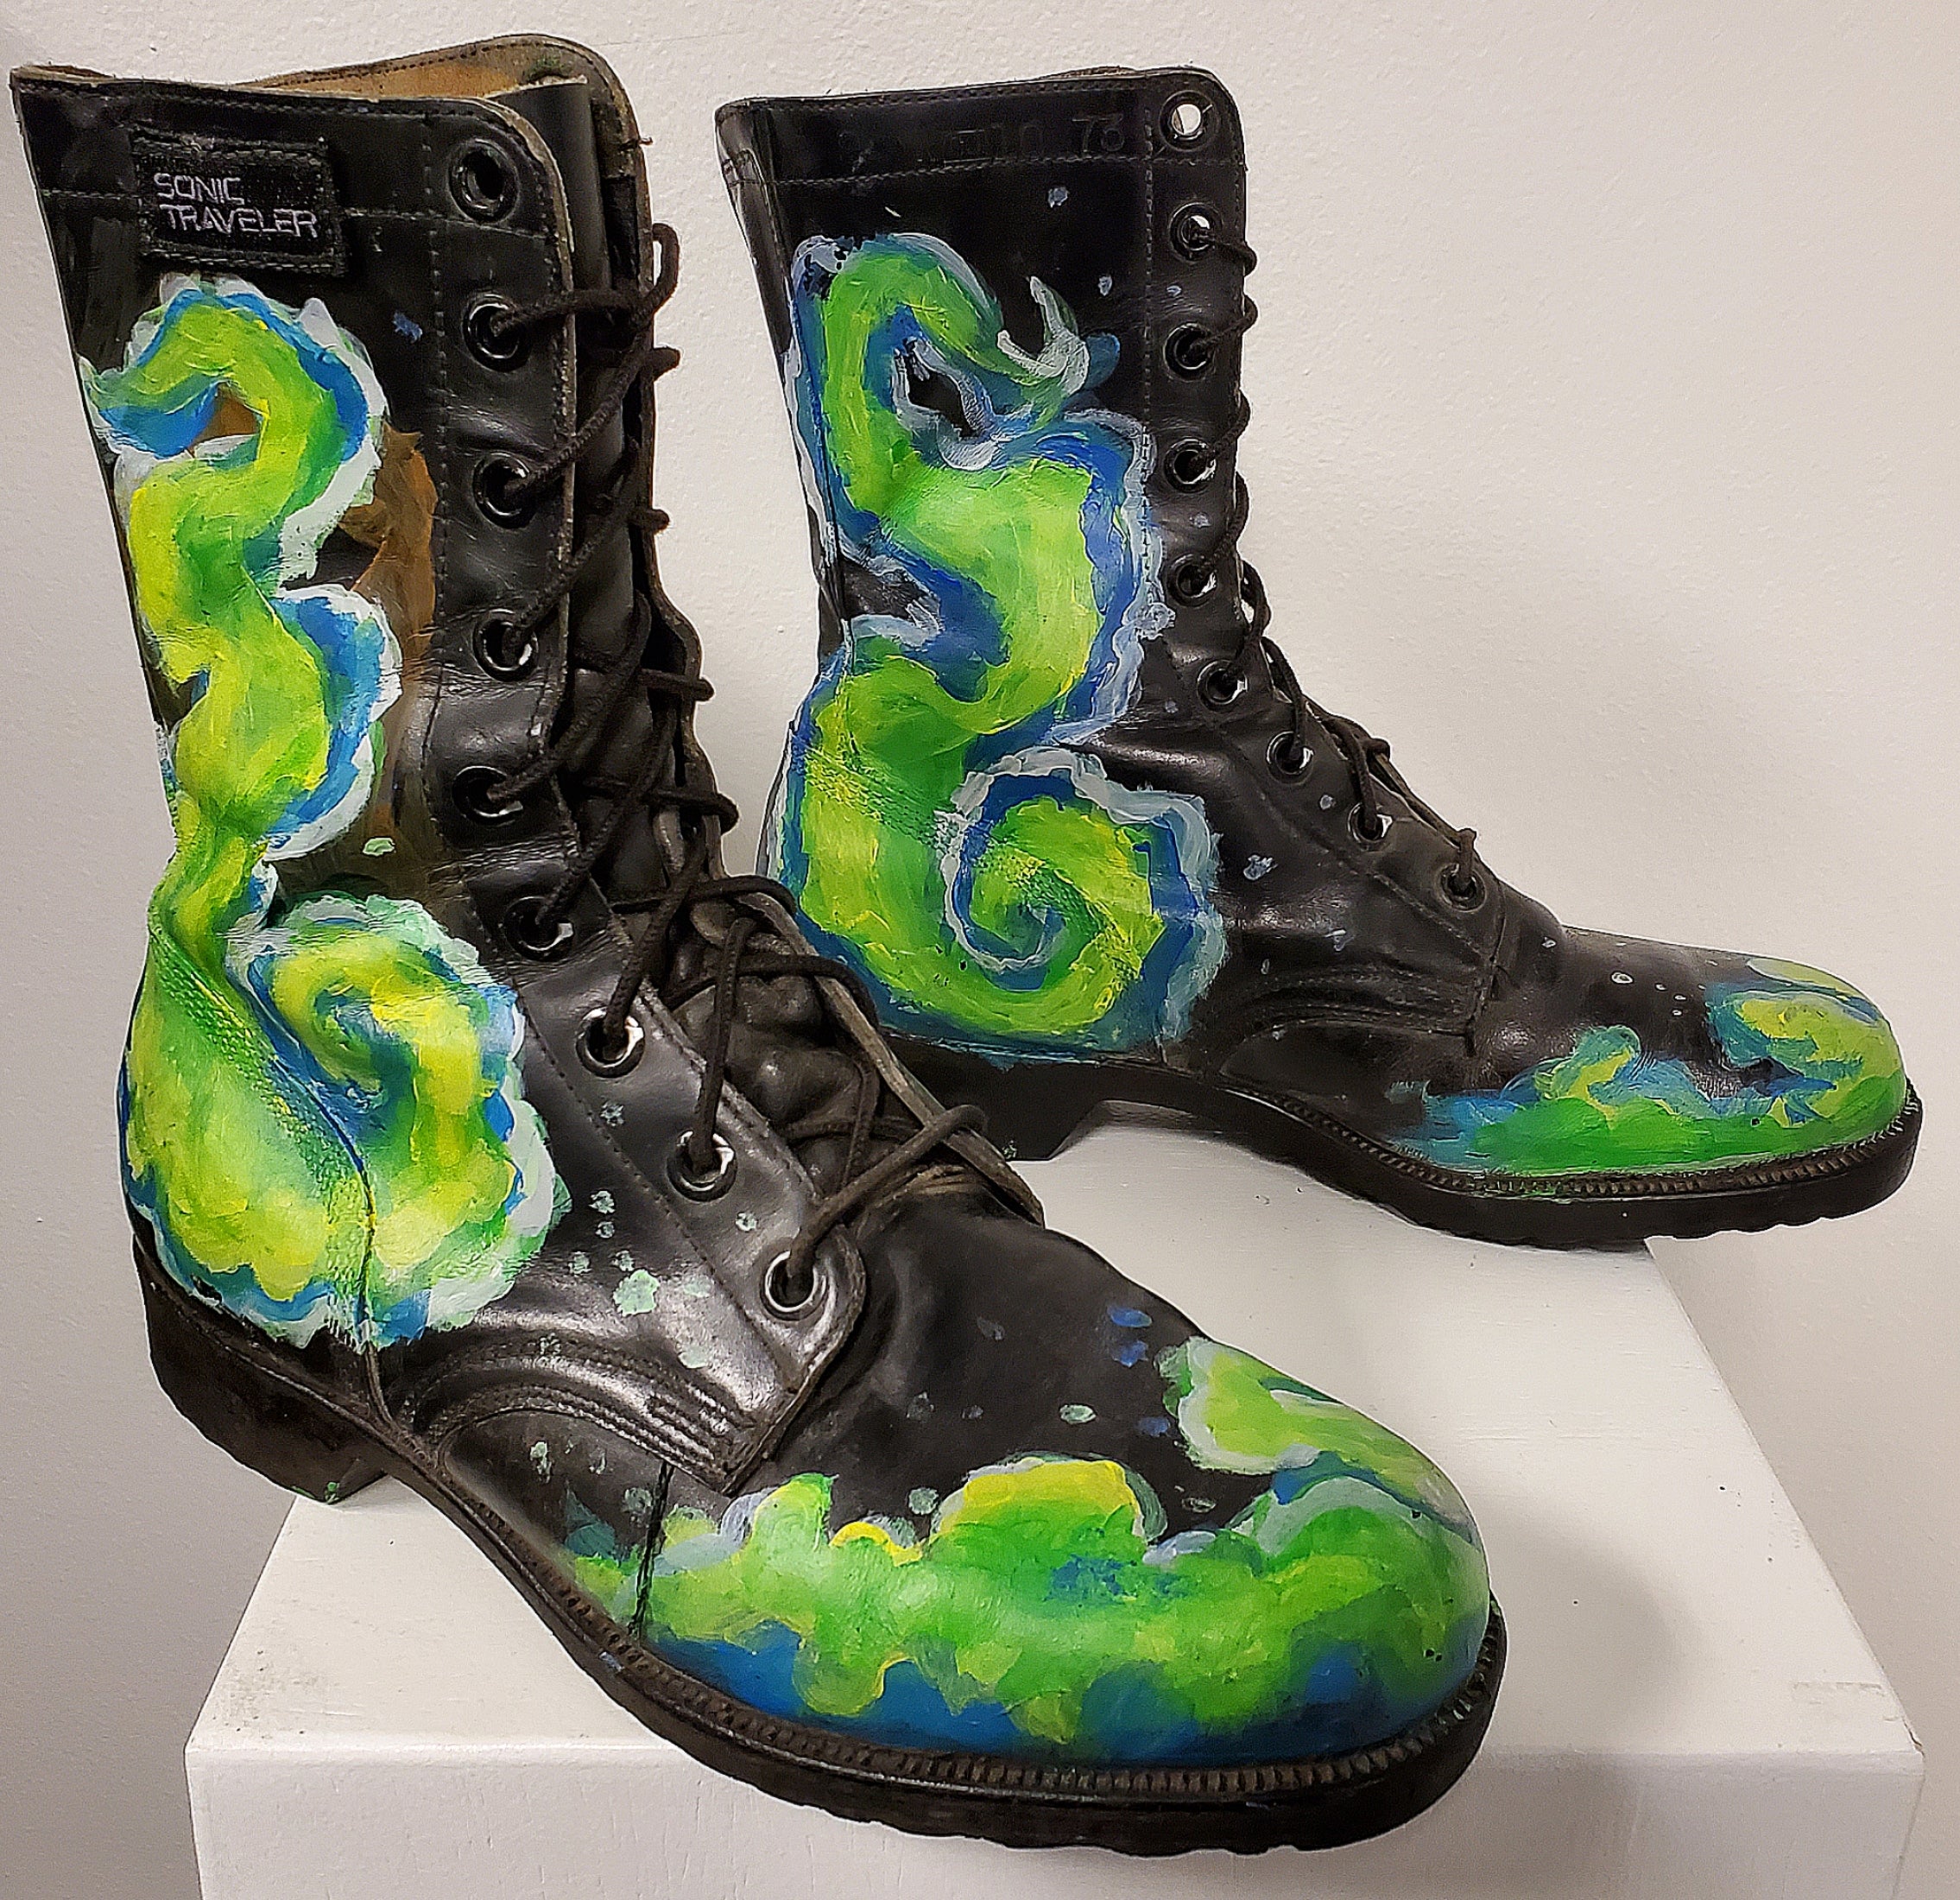 Gorgeous One of a kind Hand Painted Personalized designs on boots